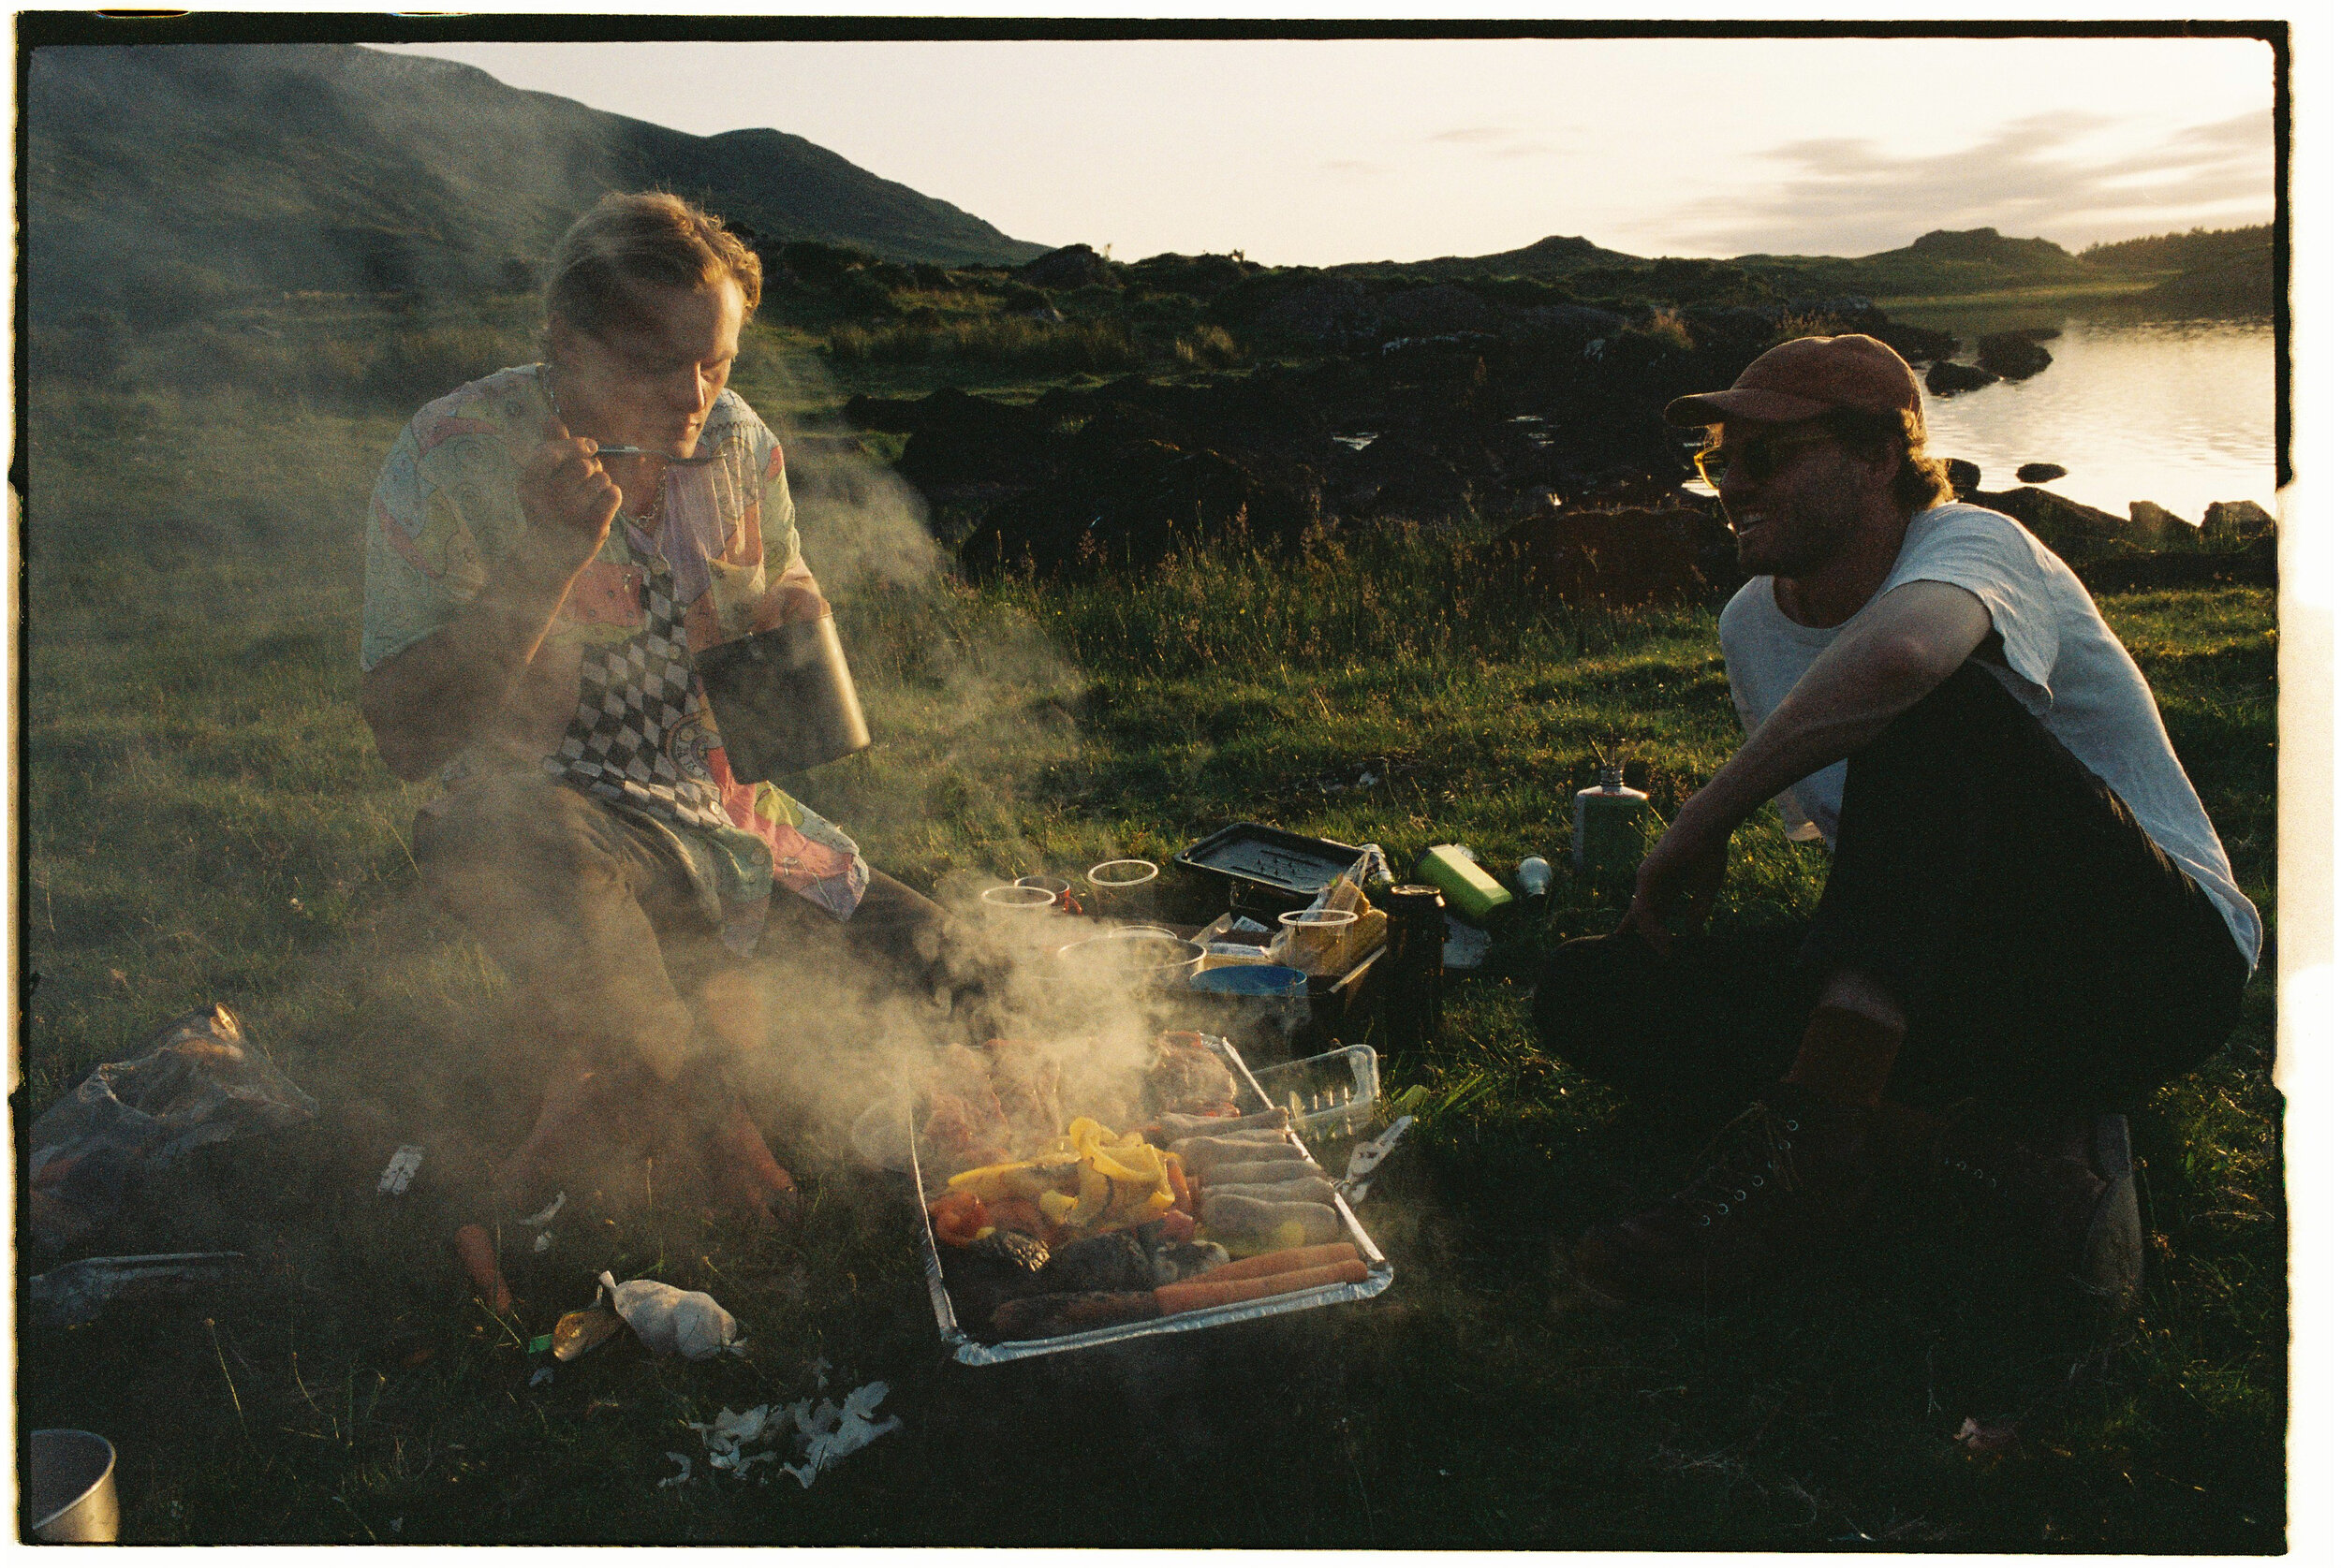 Camp cooking with Piers &amp; Jo, July '21